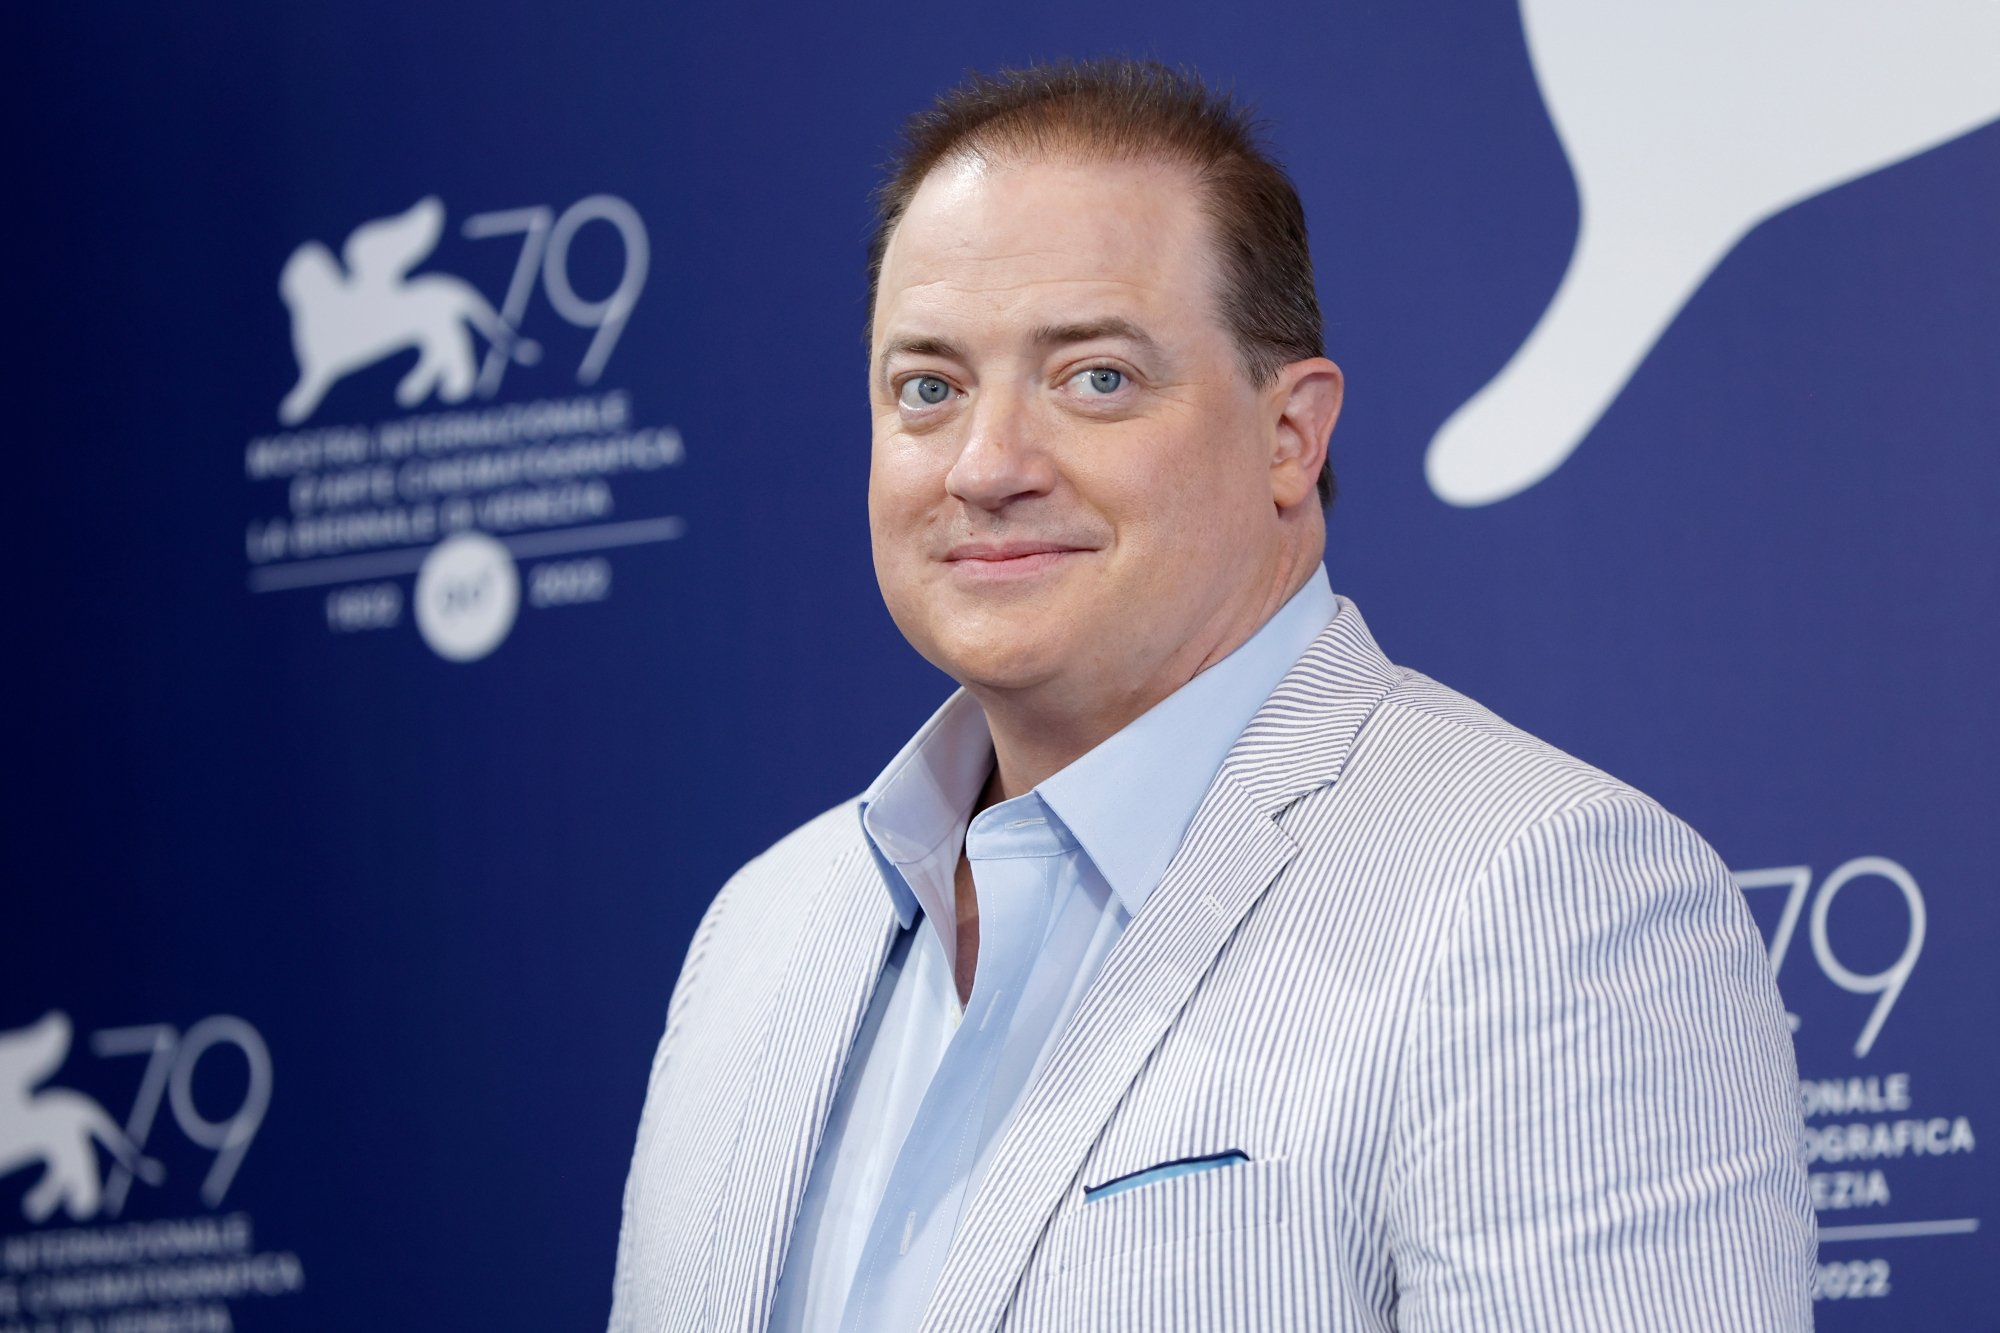 'The Whale' Brendan Fraser with a slight smile on his face, wearing a suit in front of a step and repeat